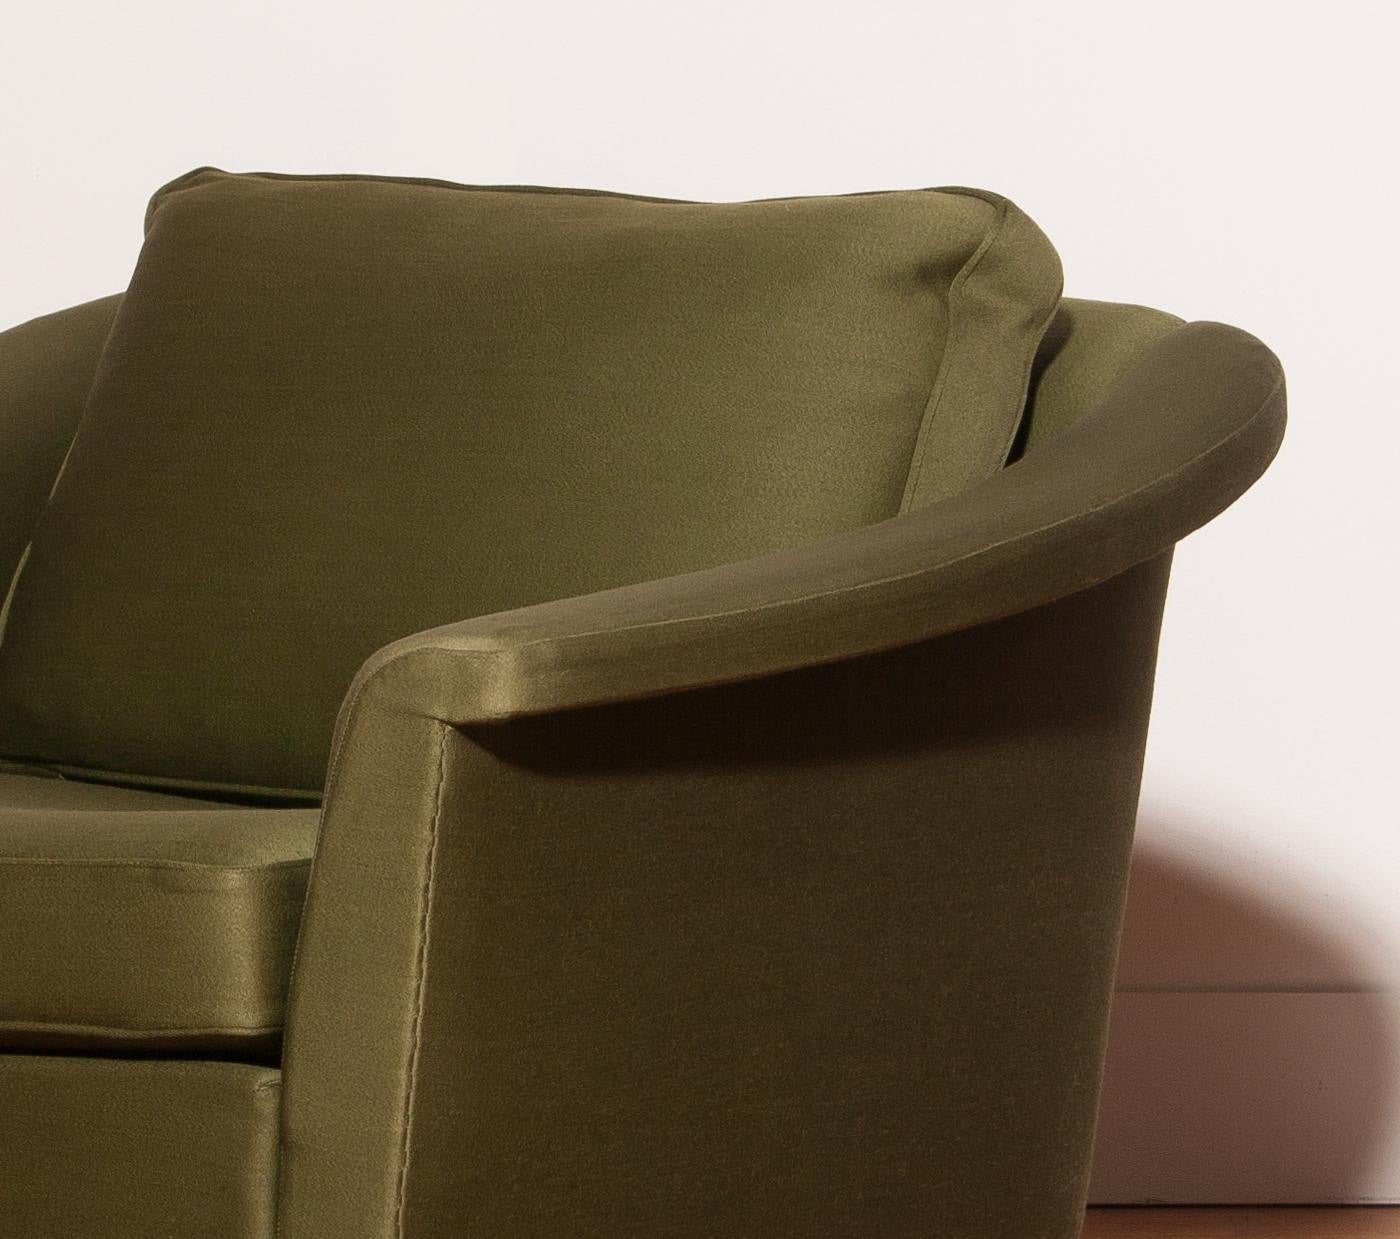 1960s, Green Lounge Chair by Folke Ohlsson for DUX 6